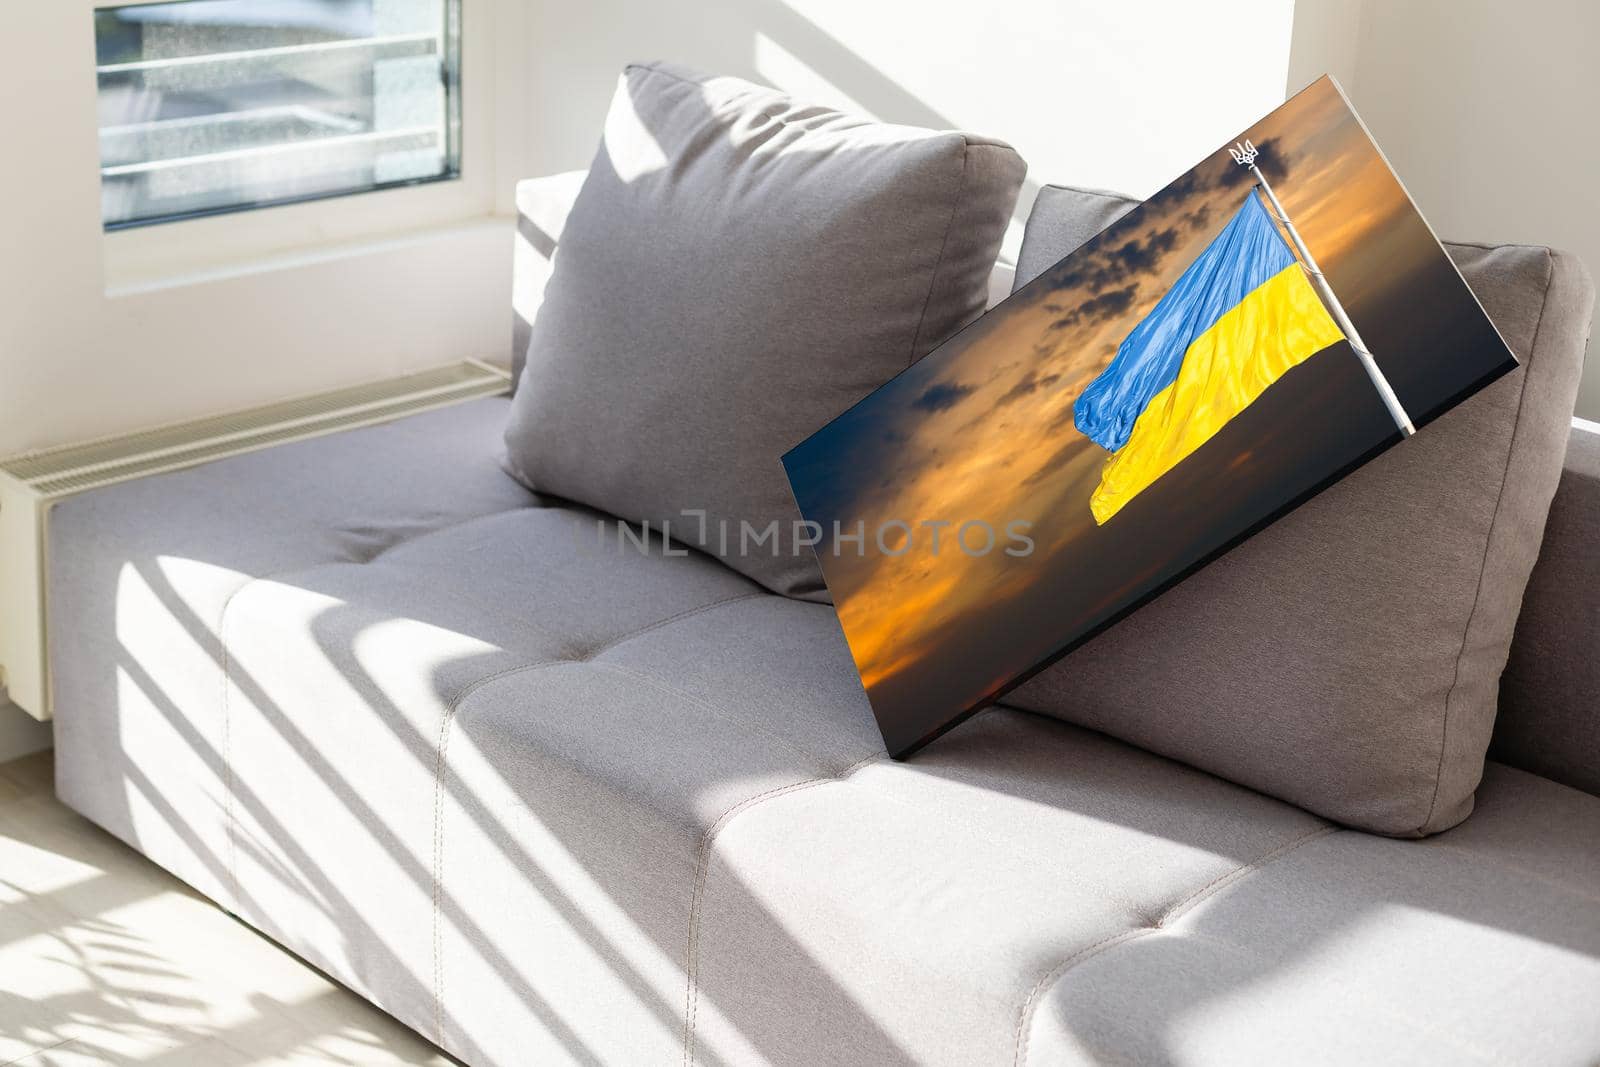 Blue and yellow flag of Ukraine paints on a canvas, national flag of Ukraine by Andelov13